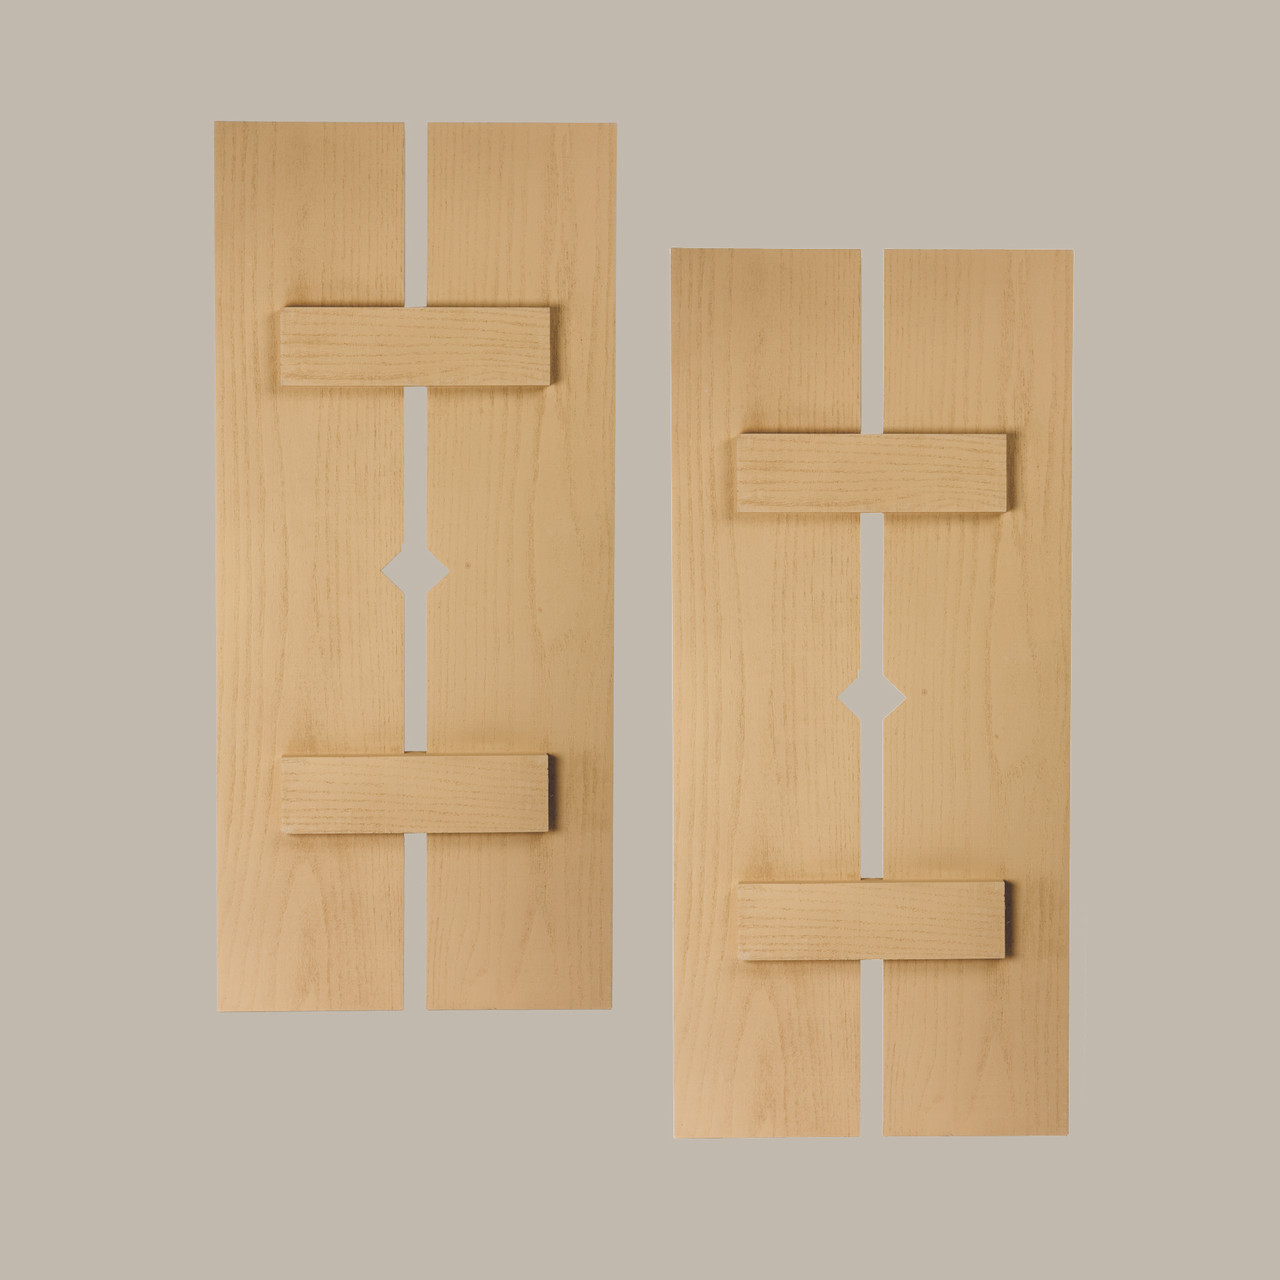 12 inch by 88 inch Plank Shutter with 2-Plank, Diamond